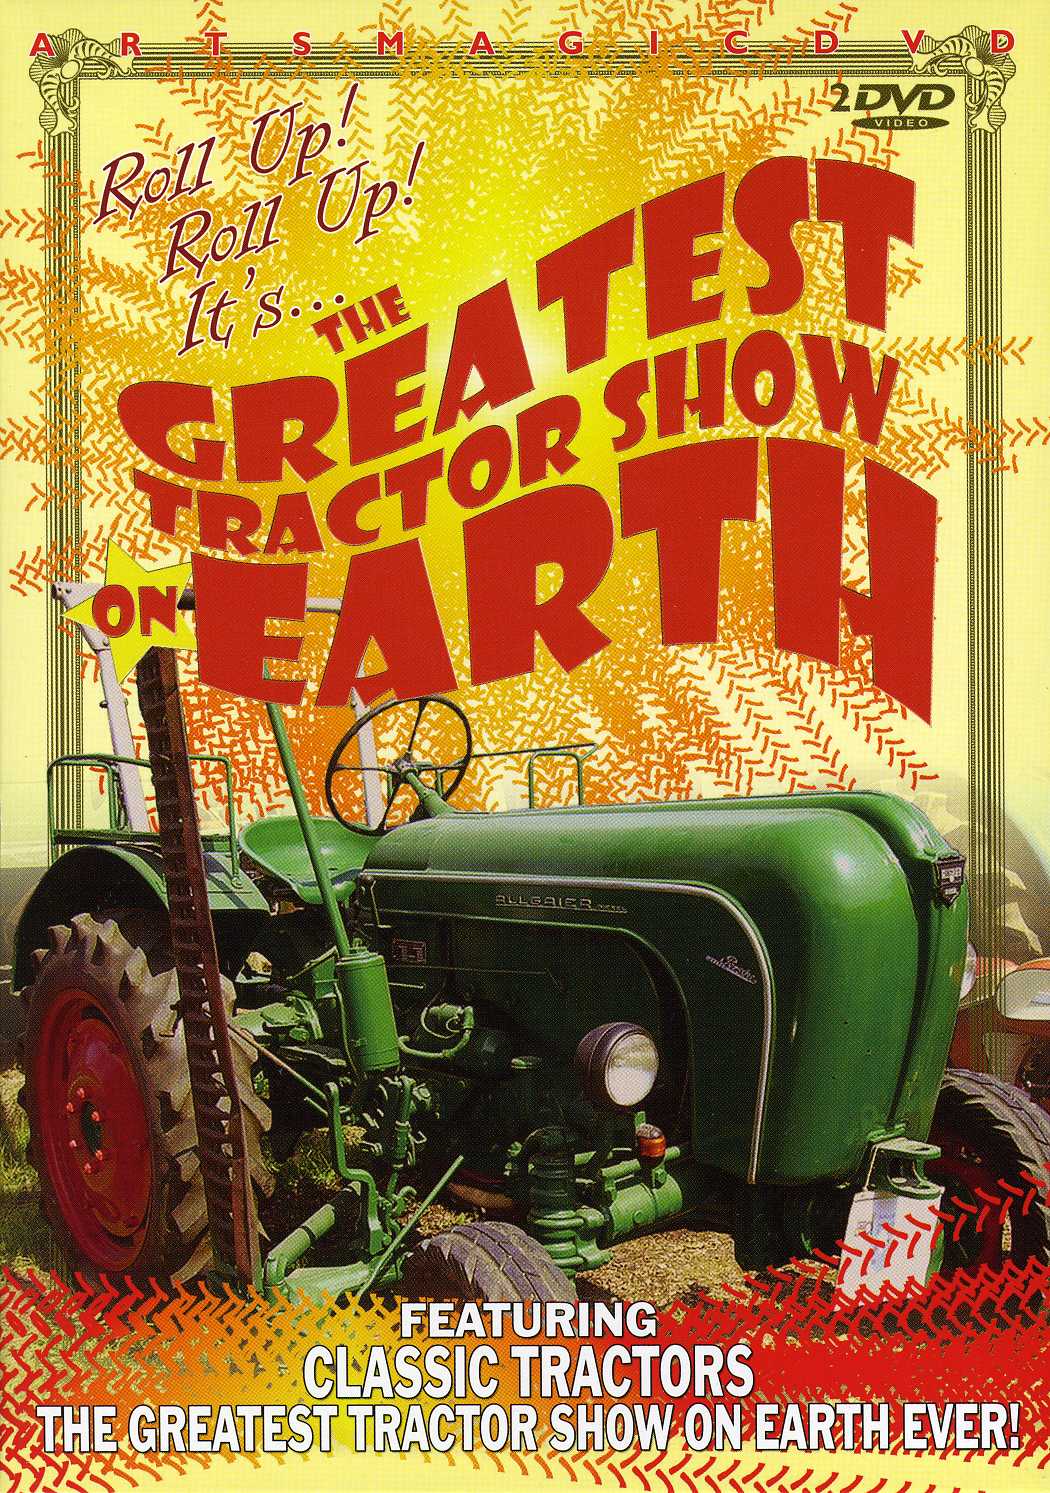 GREATEST TRACTOR SHOW ON EARTH